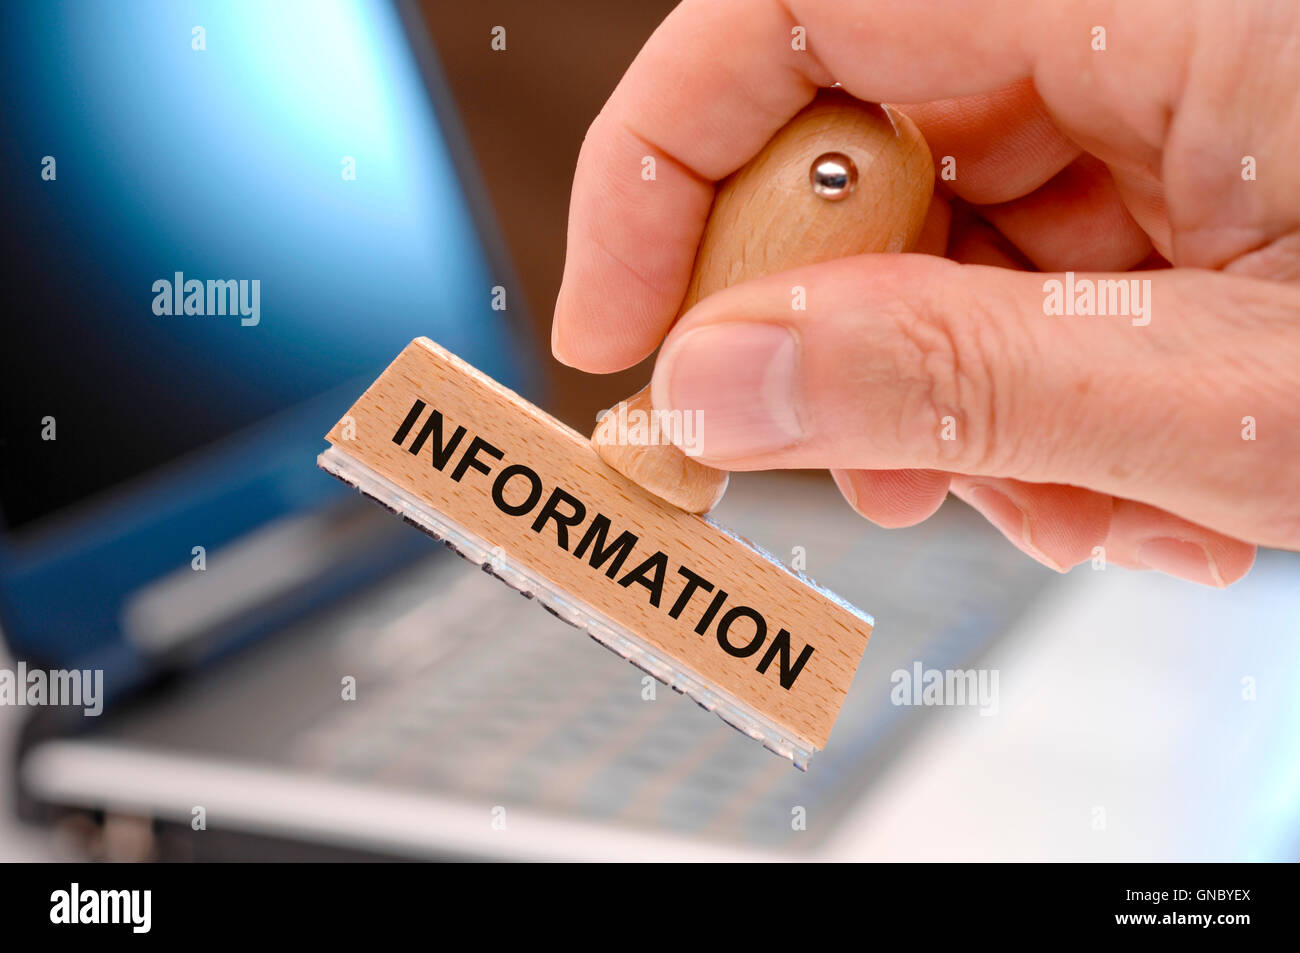 rubber stamp in hand and information printed on it Stock Photo